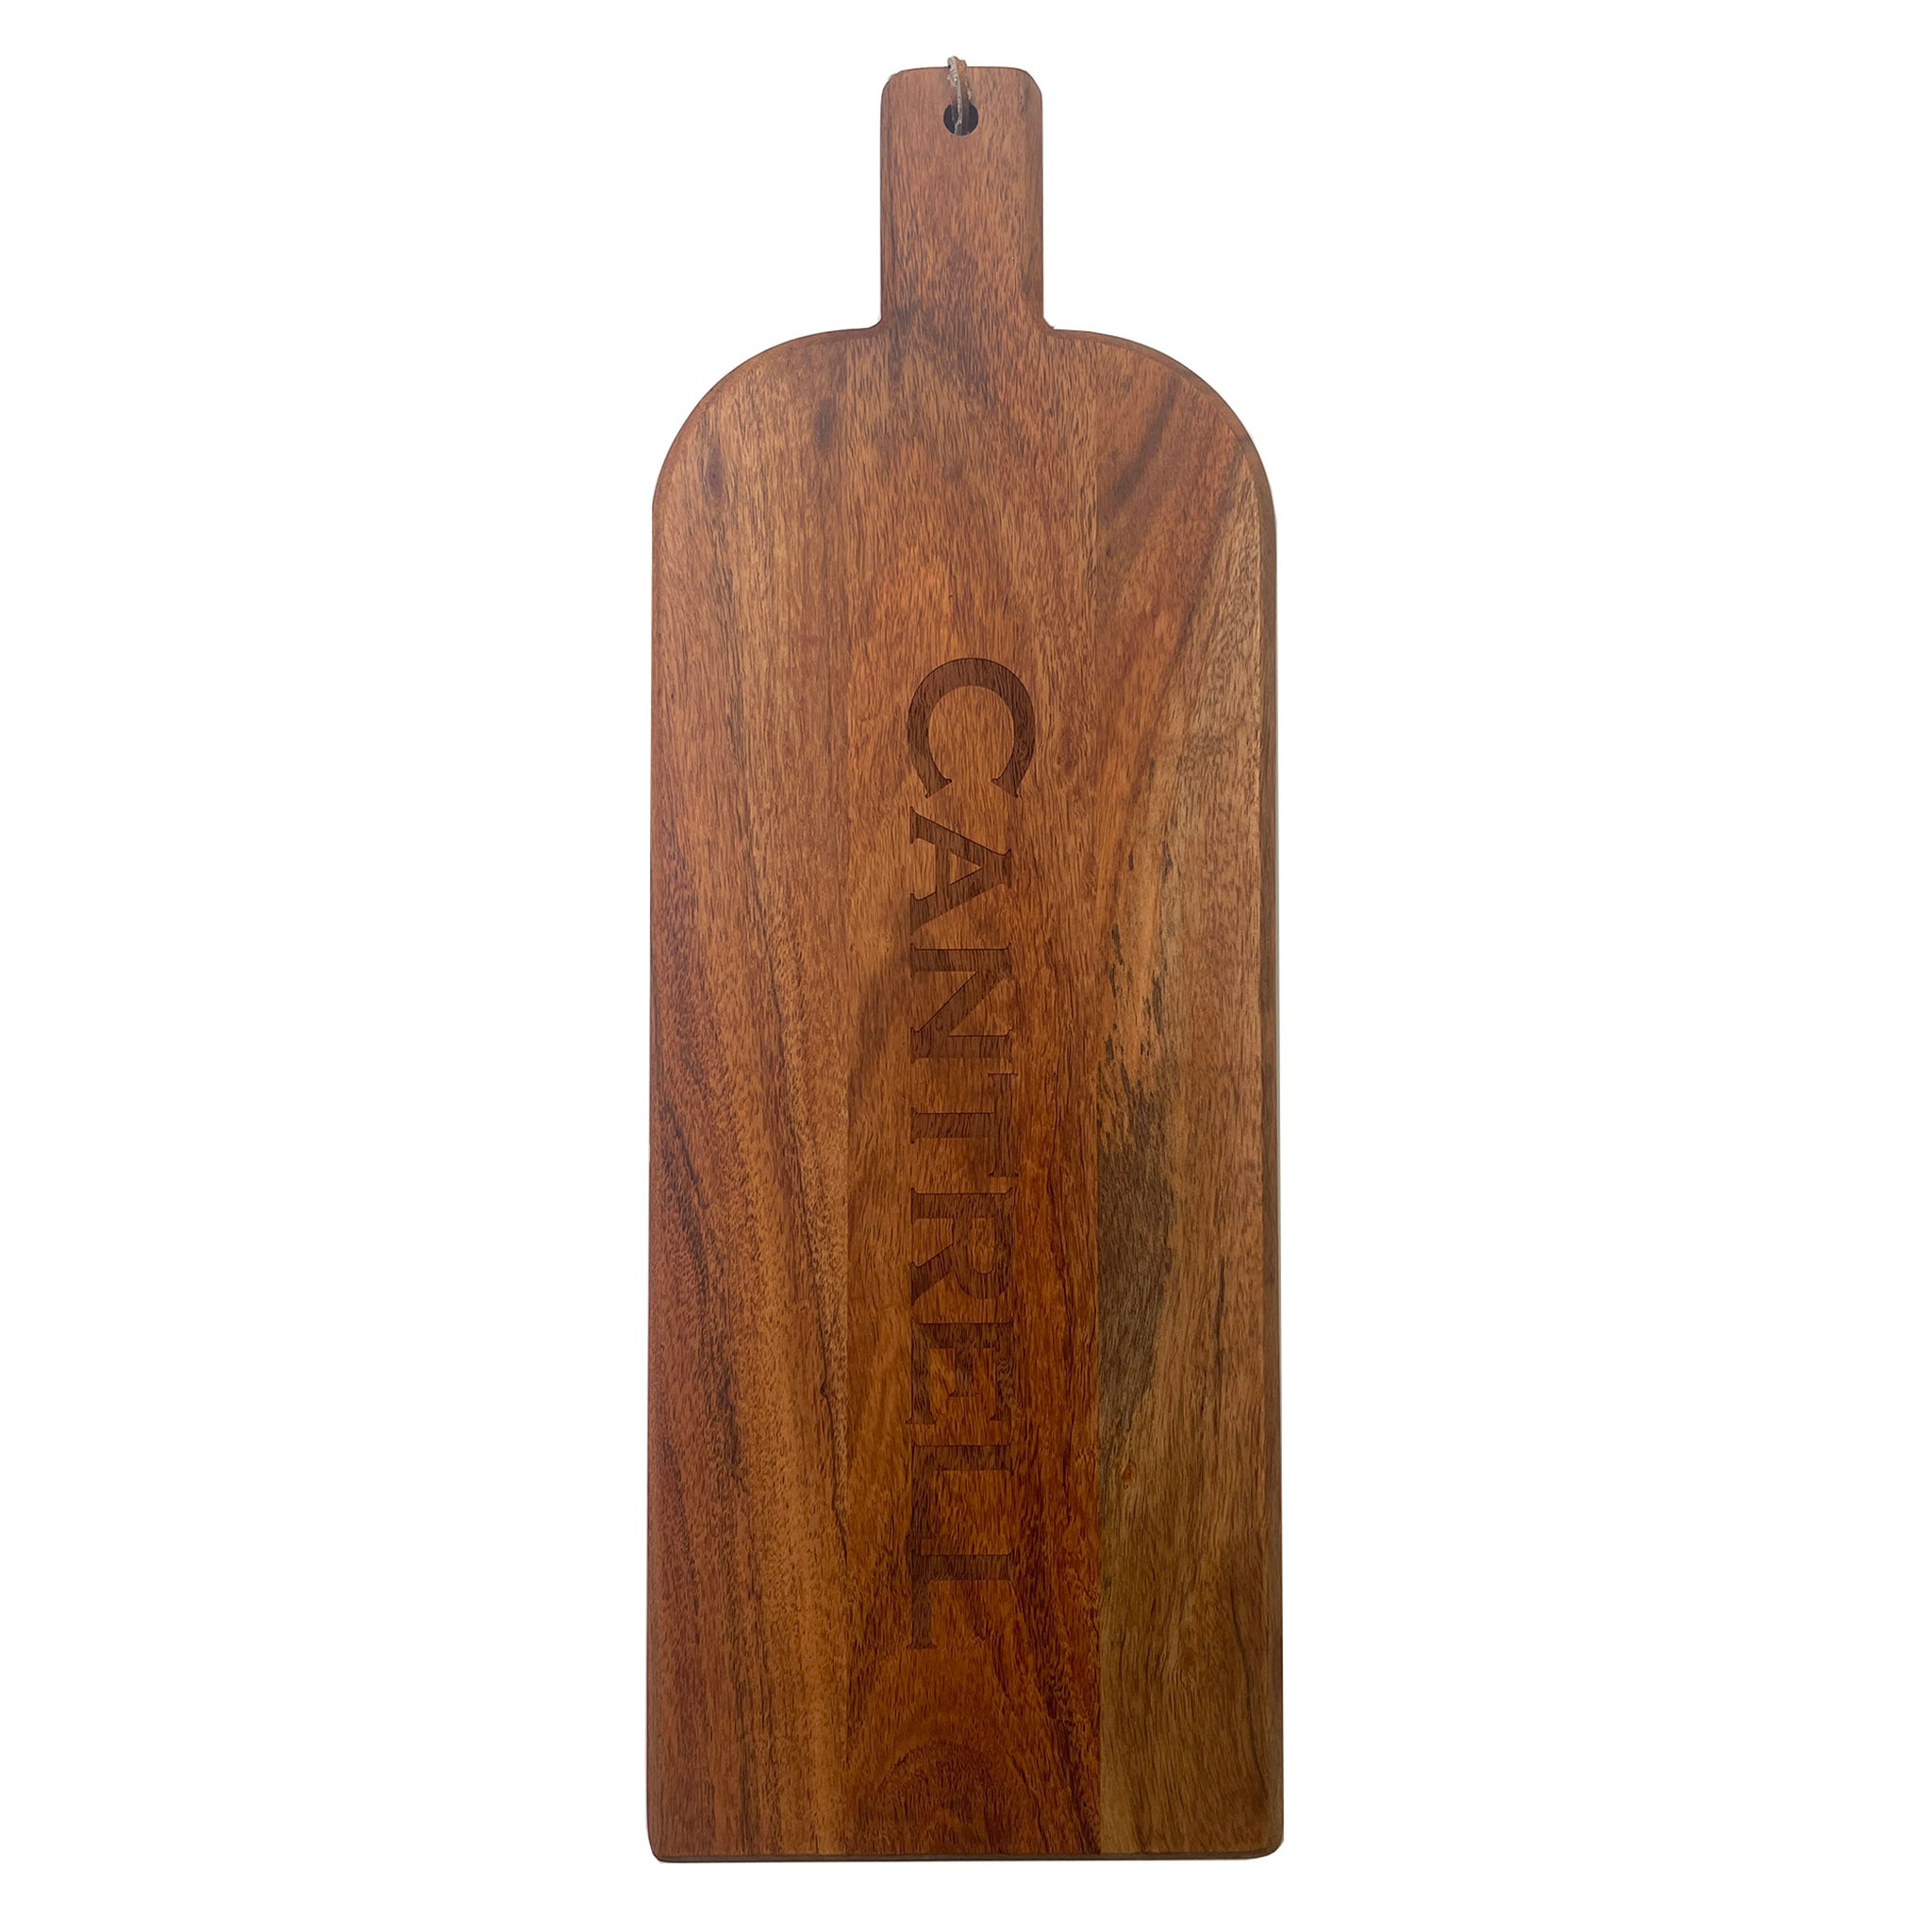 Wooden Cutting Board Leaf Design - Personalized Gallery